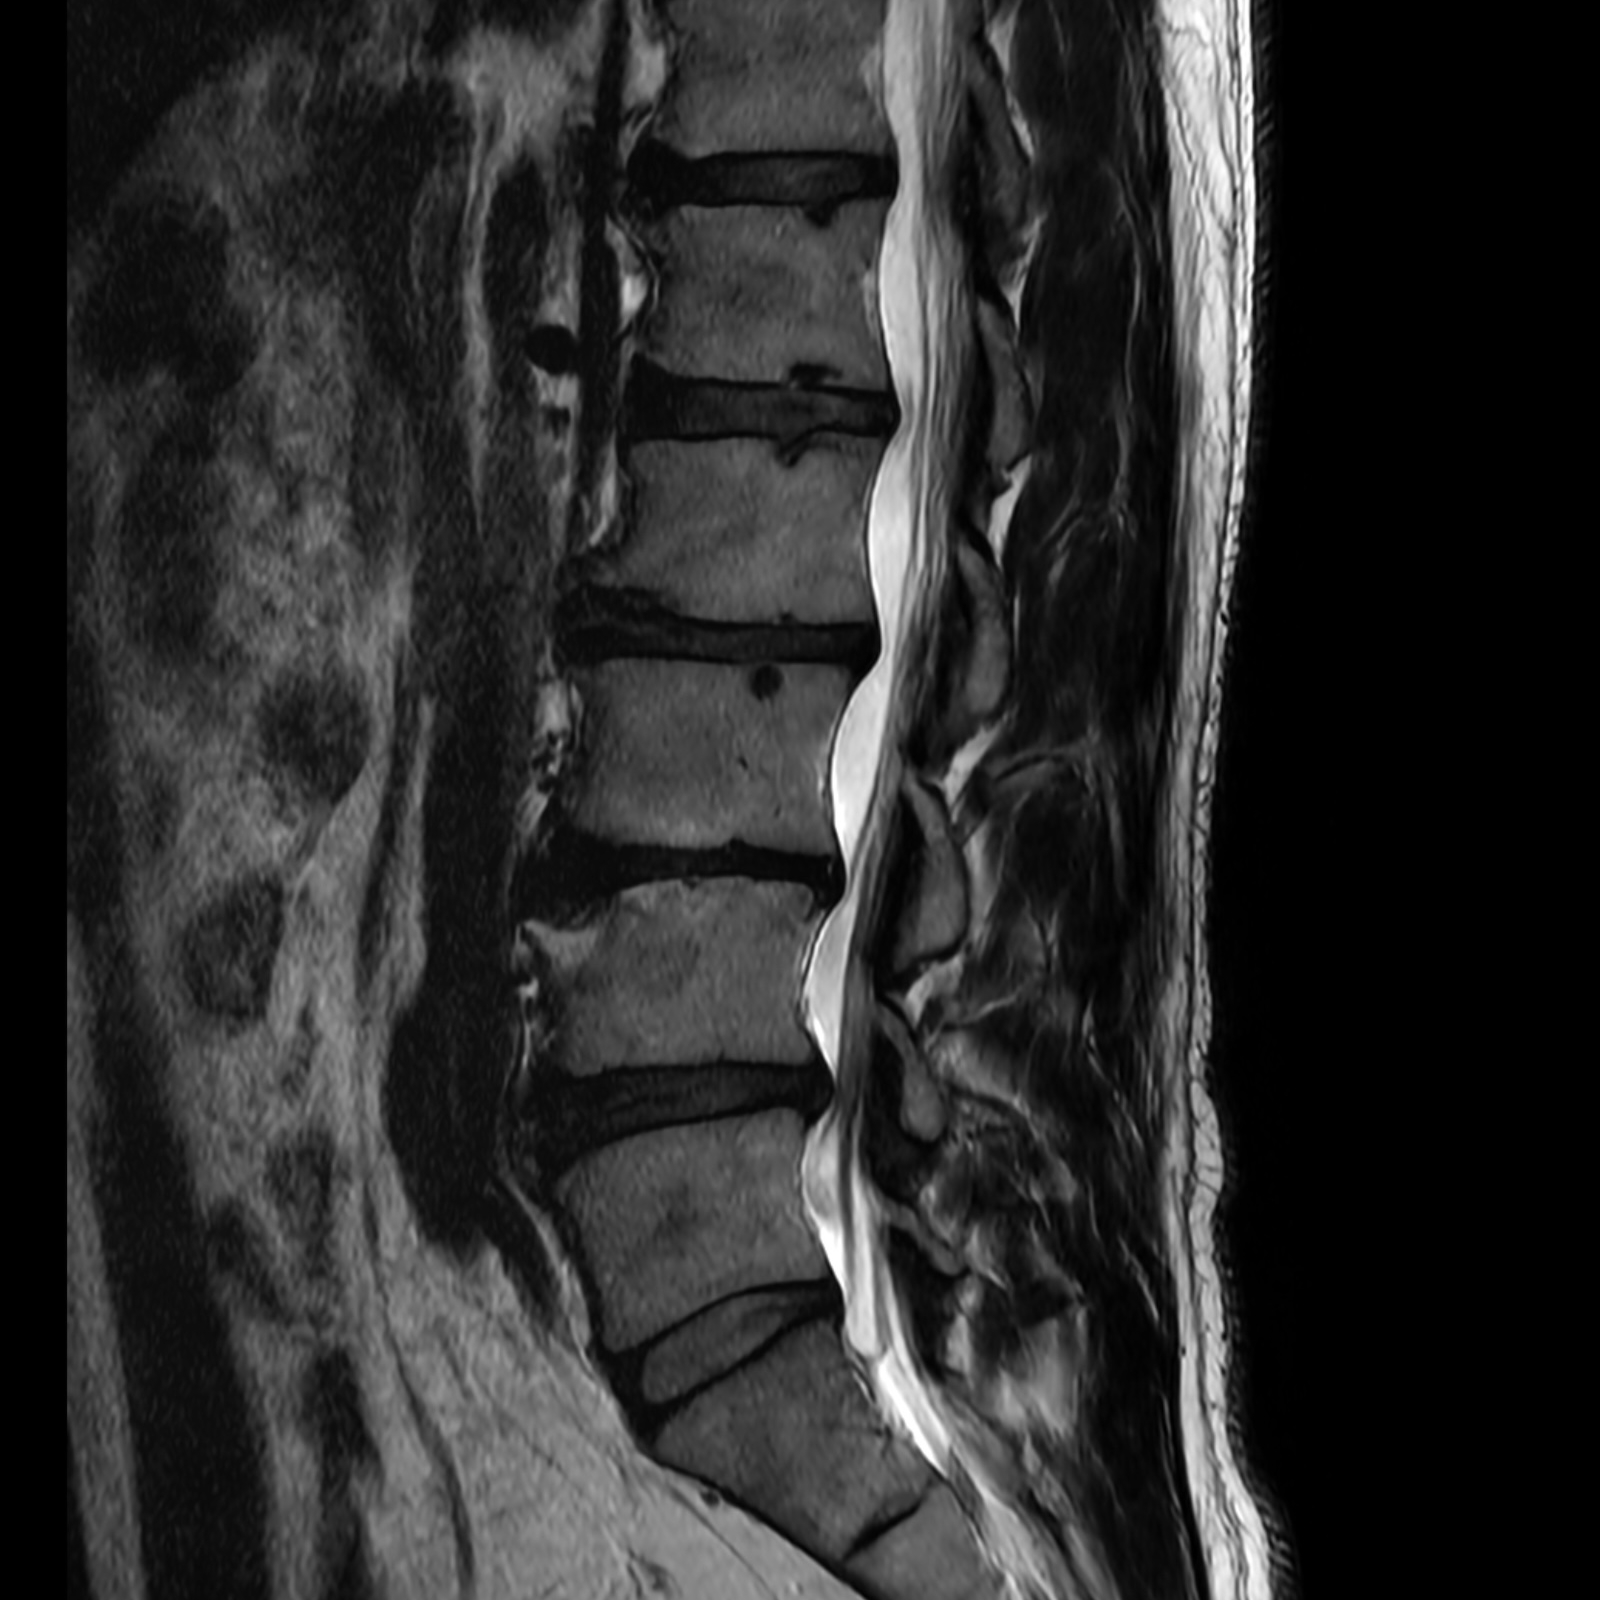 MRI Scan, Spine with SwiftMR